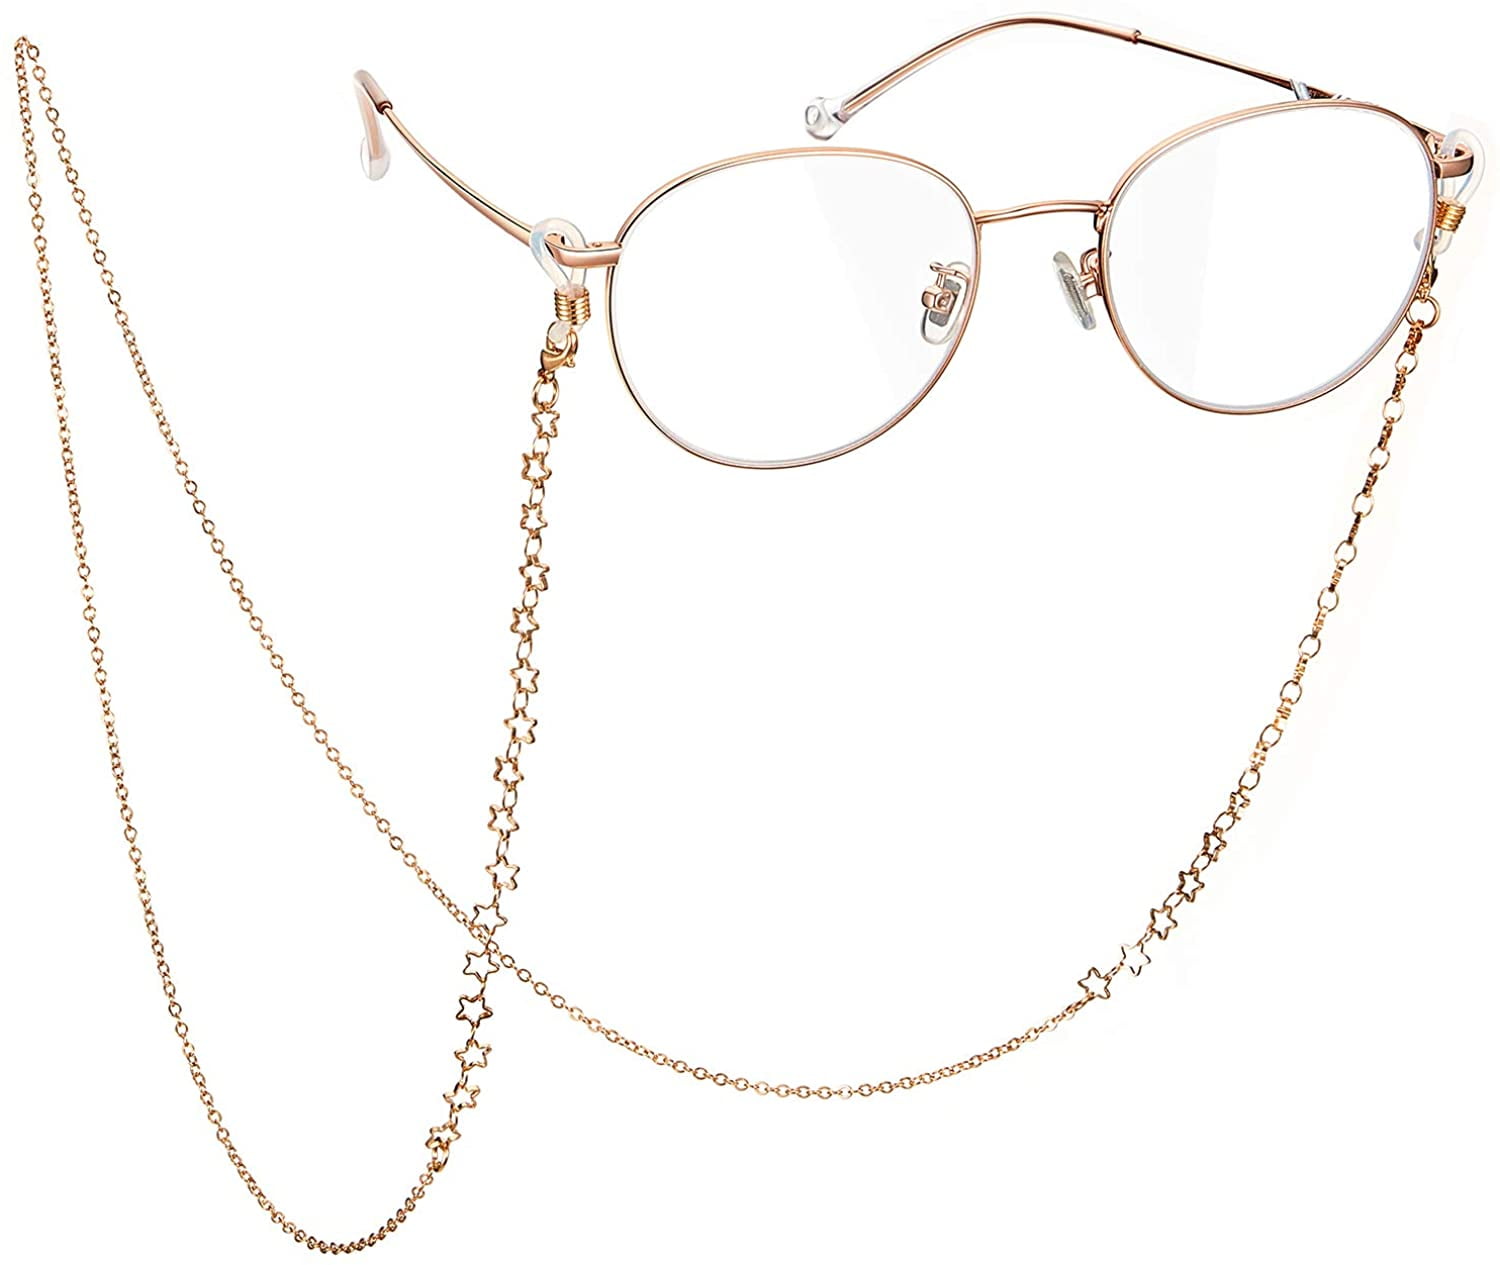 Gold and Silver 2 Pieces Eyeglass Chains for Women Glasses Reading Glasses Cords Sunglasses Holder Strap Lanyards Eyewear Retainer 